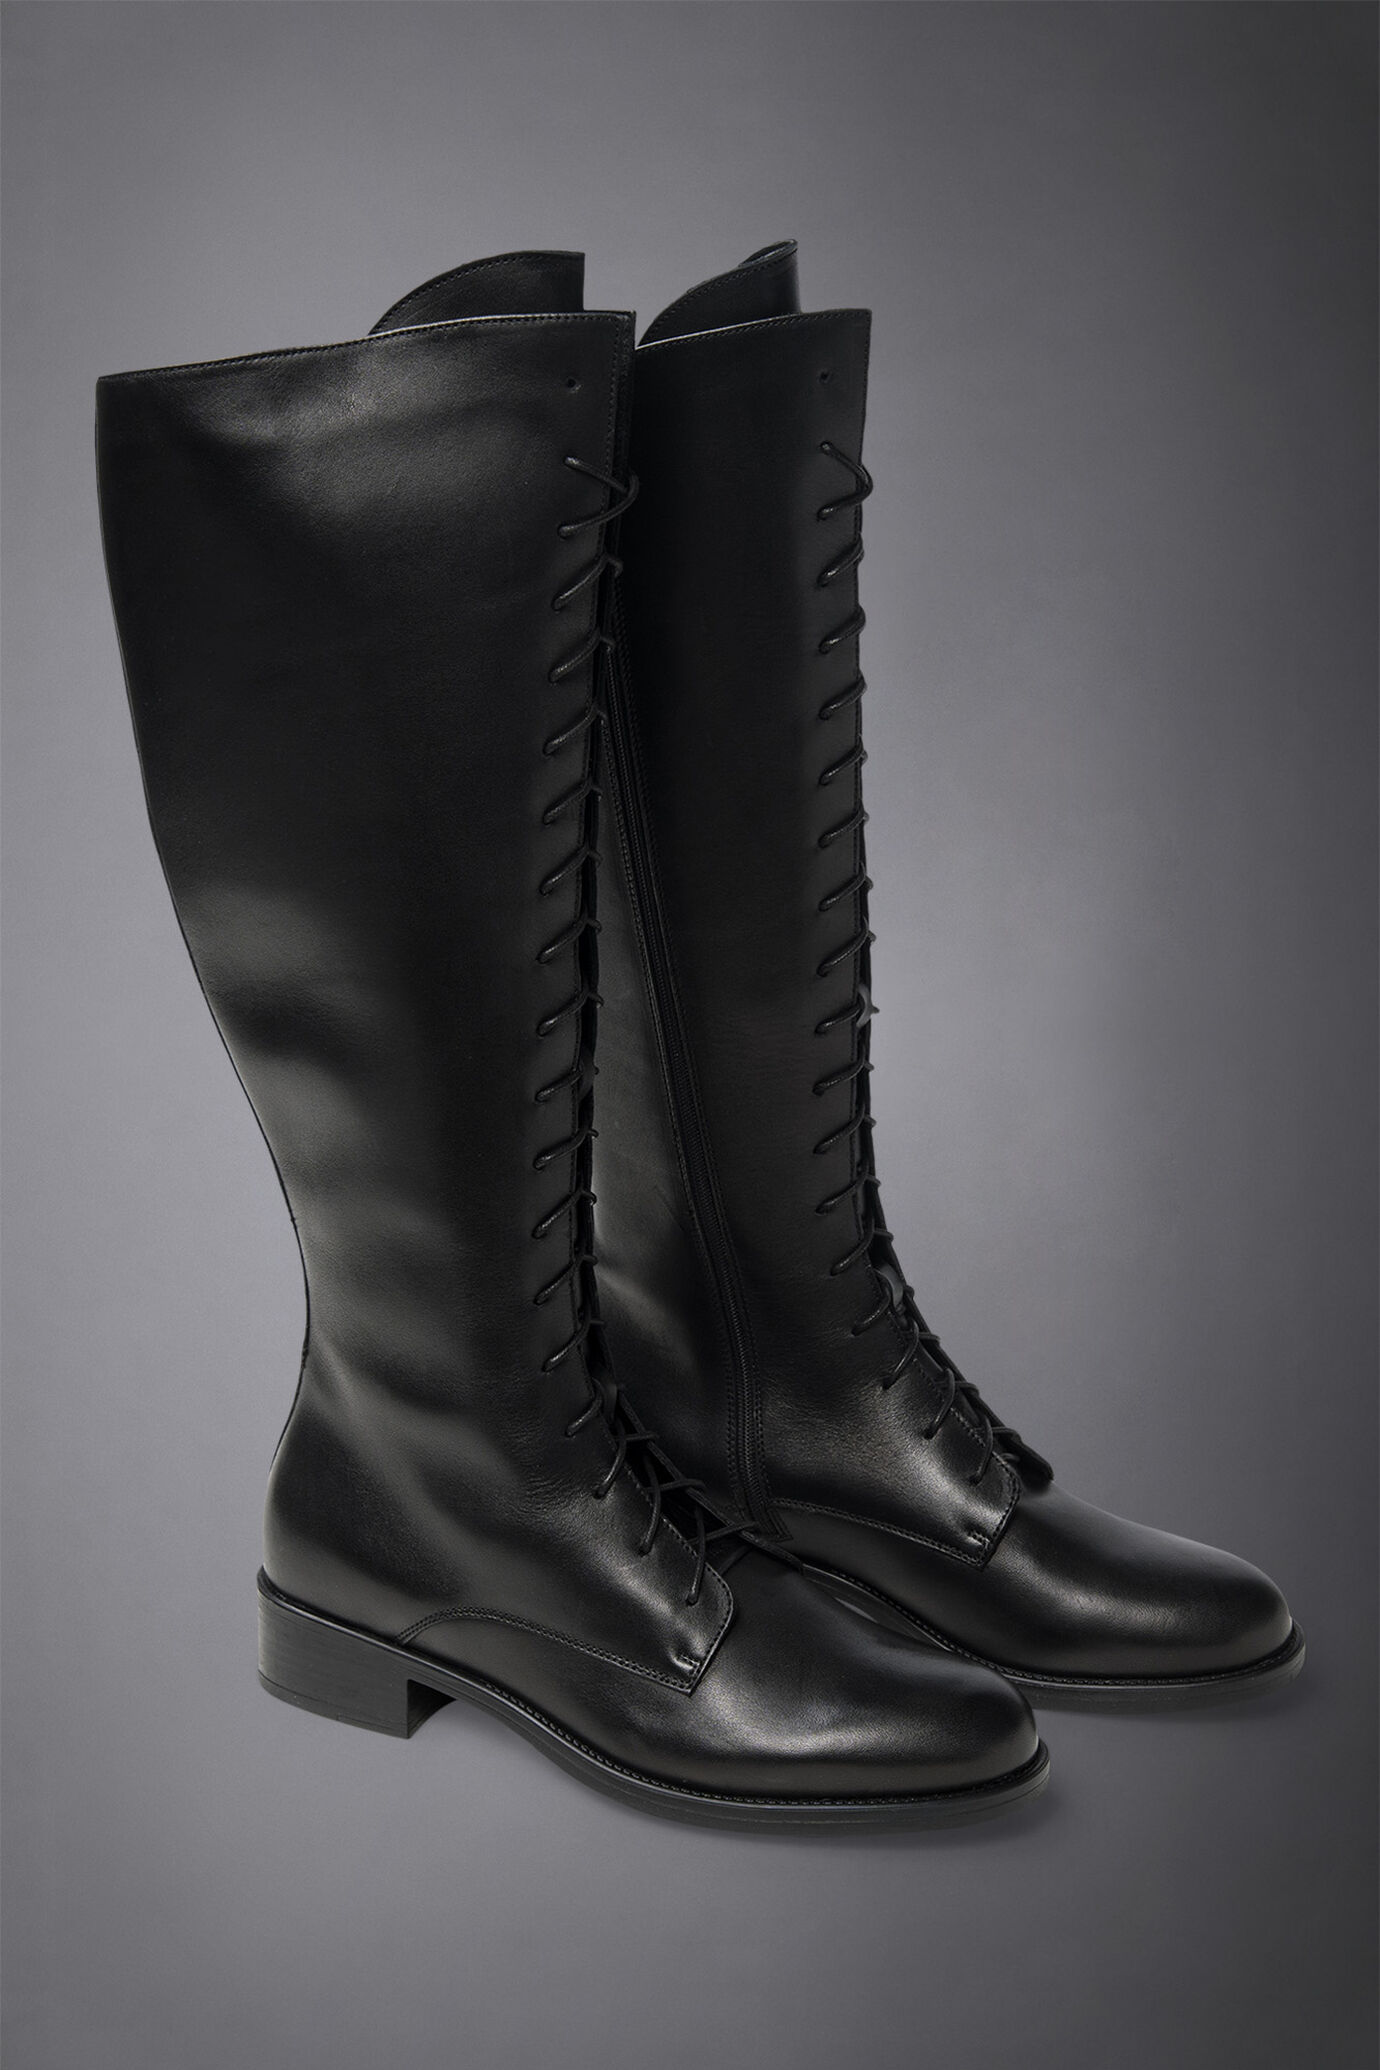 100% leather boot with rubber sole